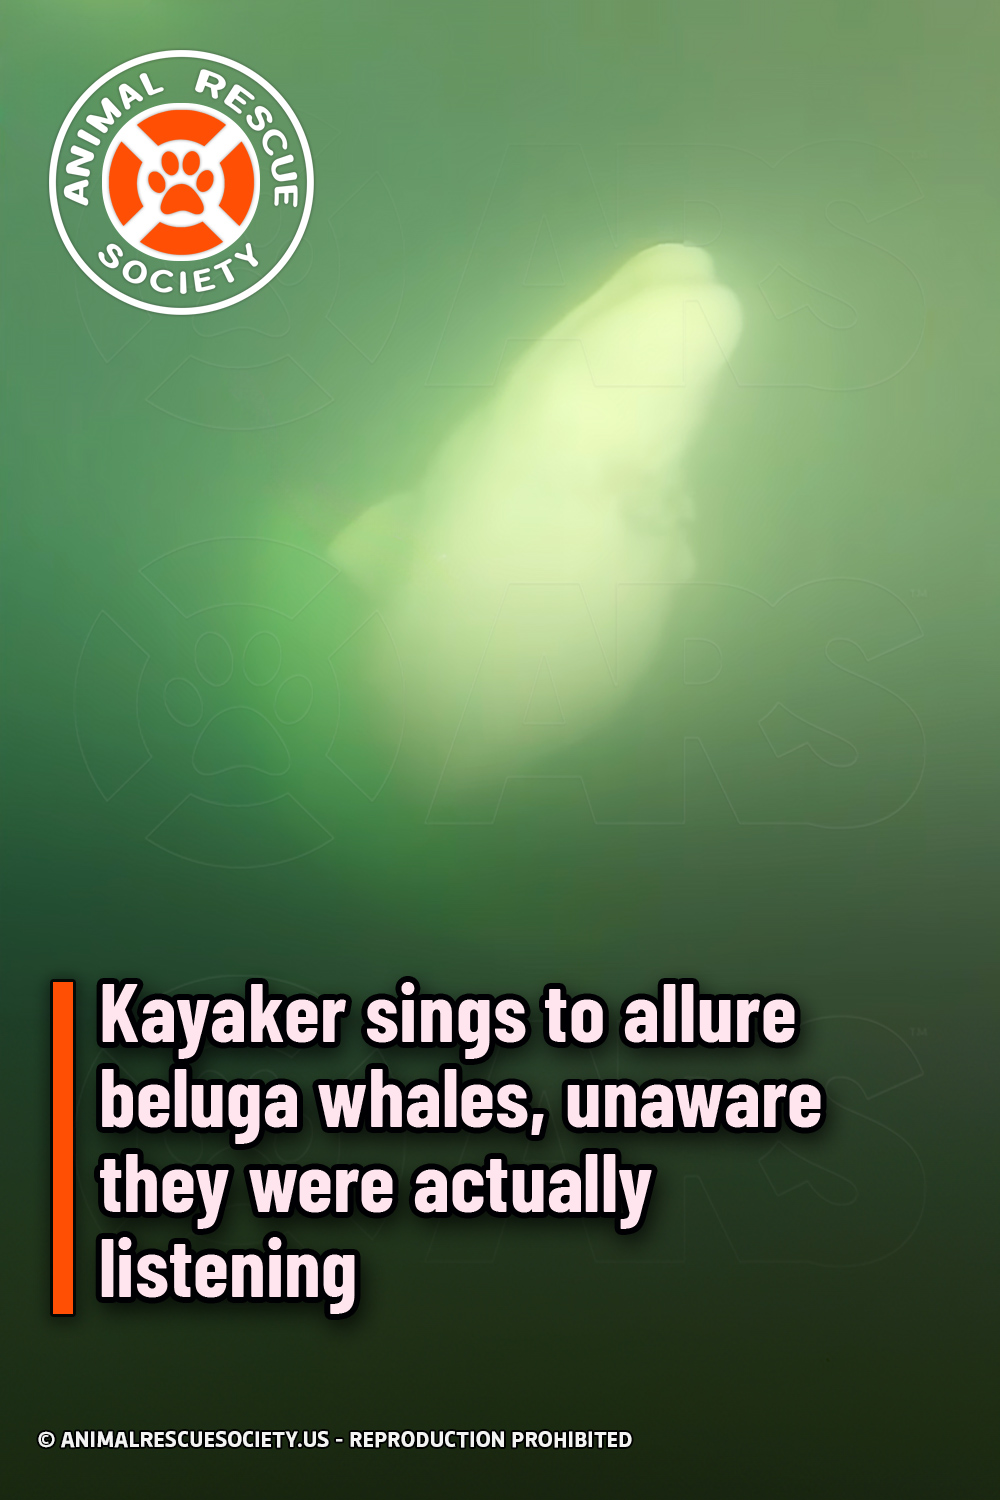 Kayaker sings to allure beluga whales, unaware they were actually listening